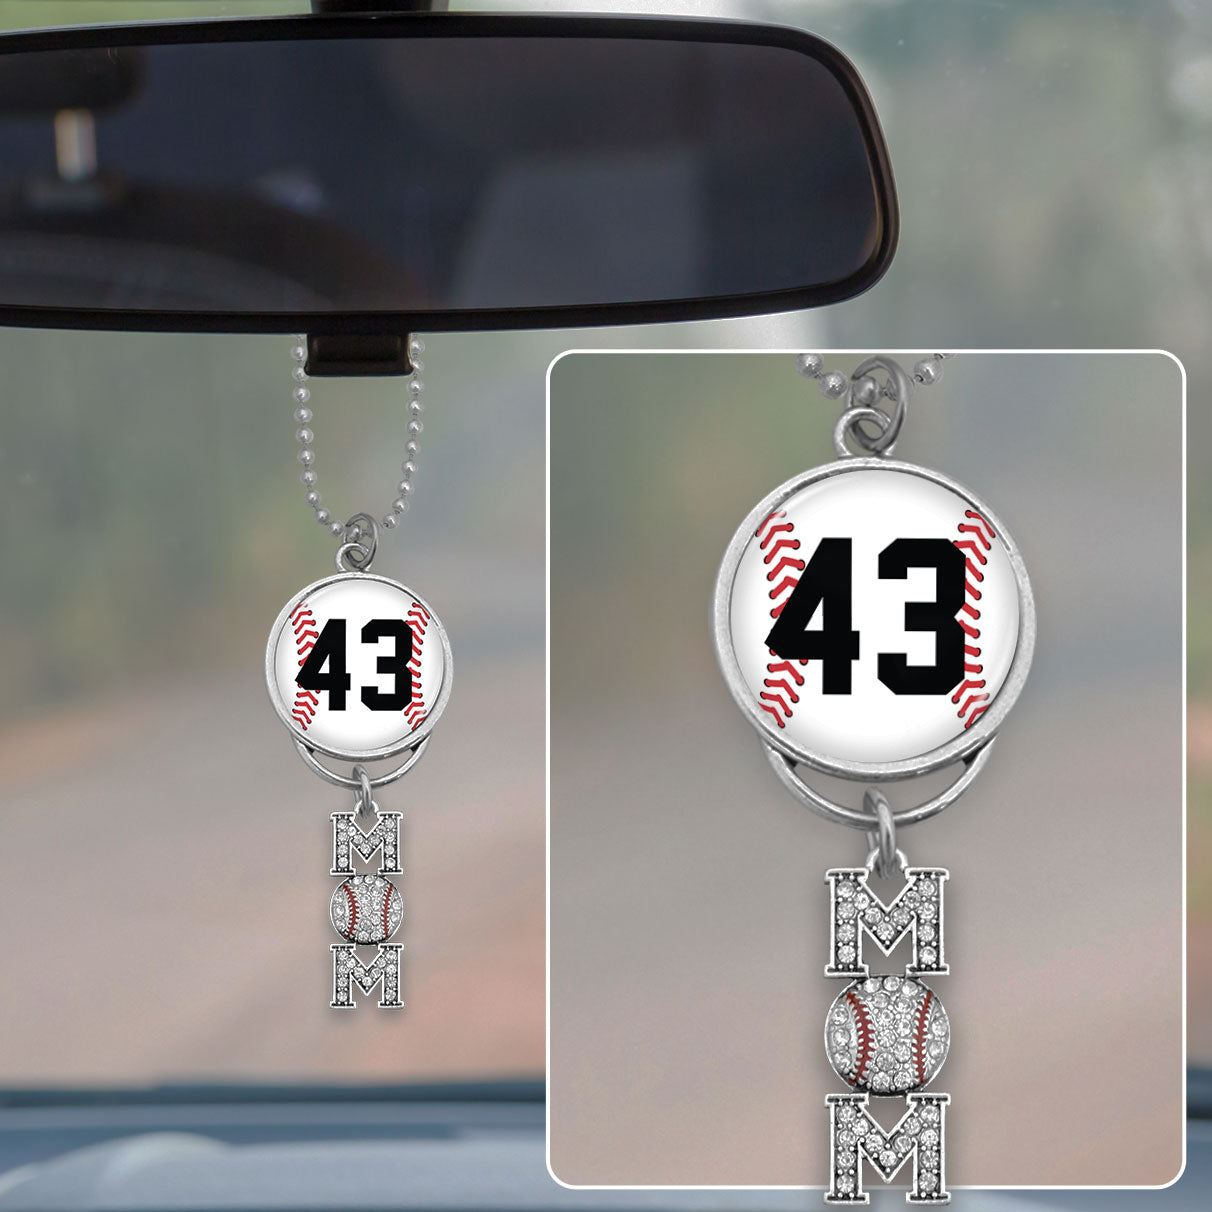 Baseball Personalized Number Rearview Mirror Charm